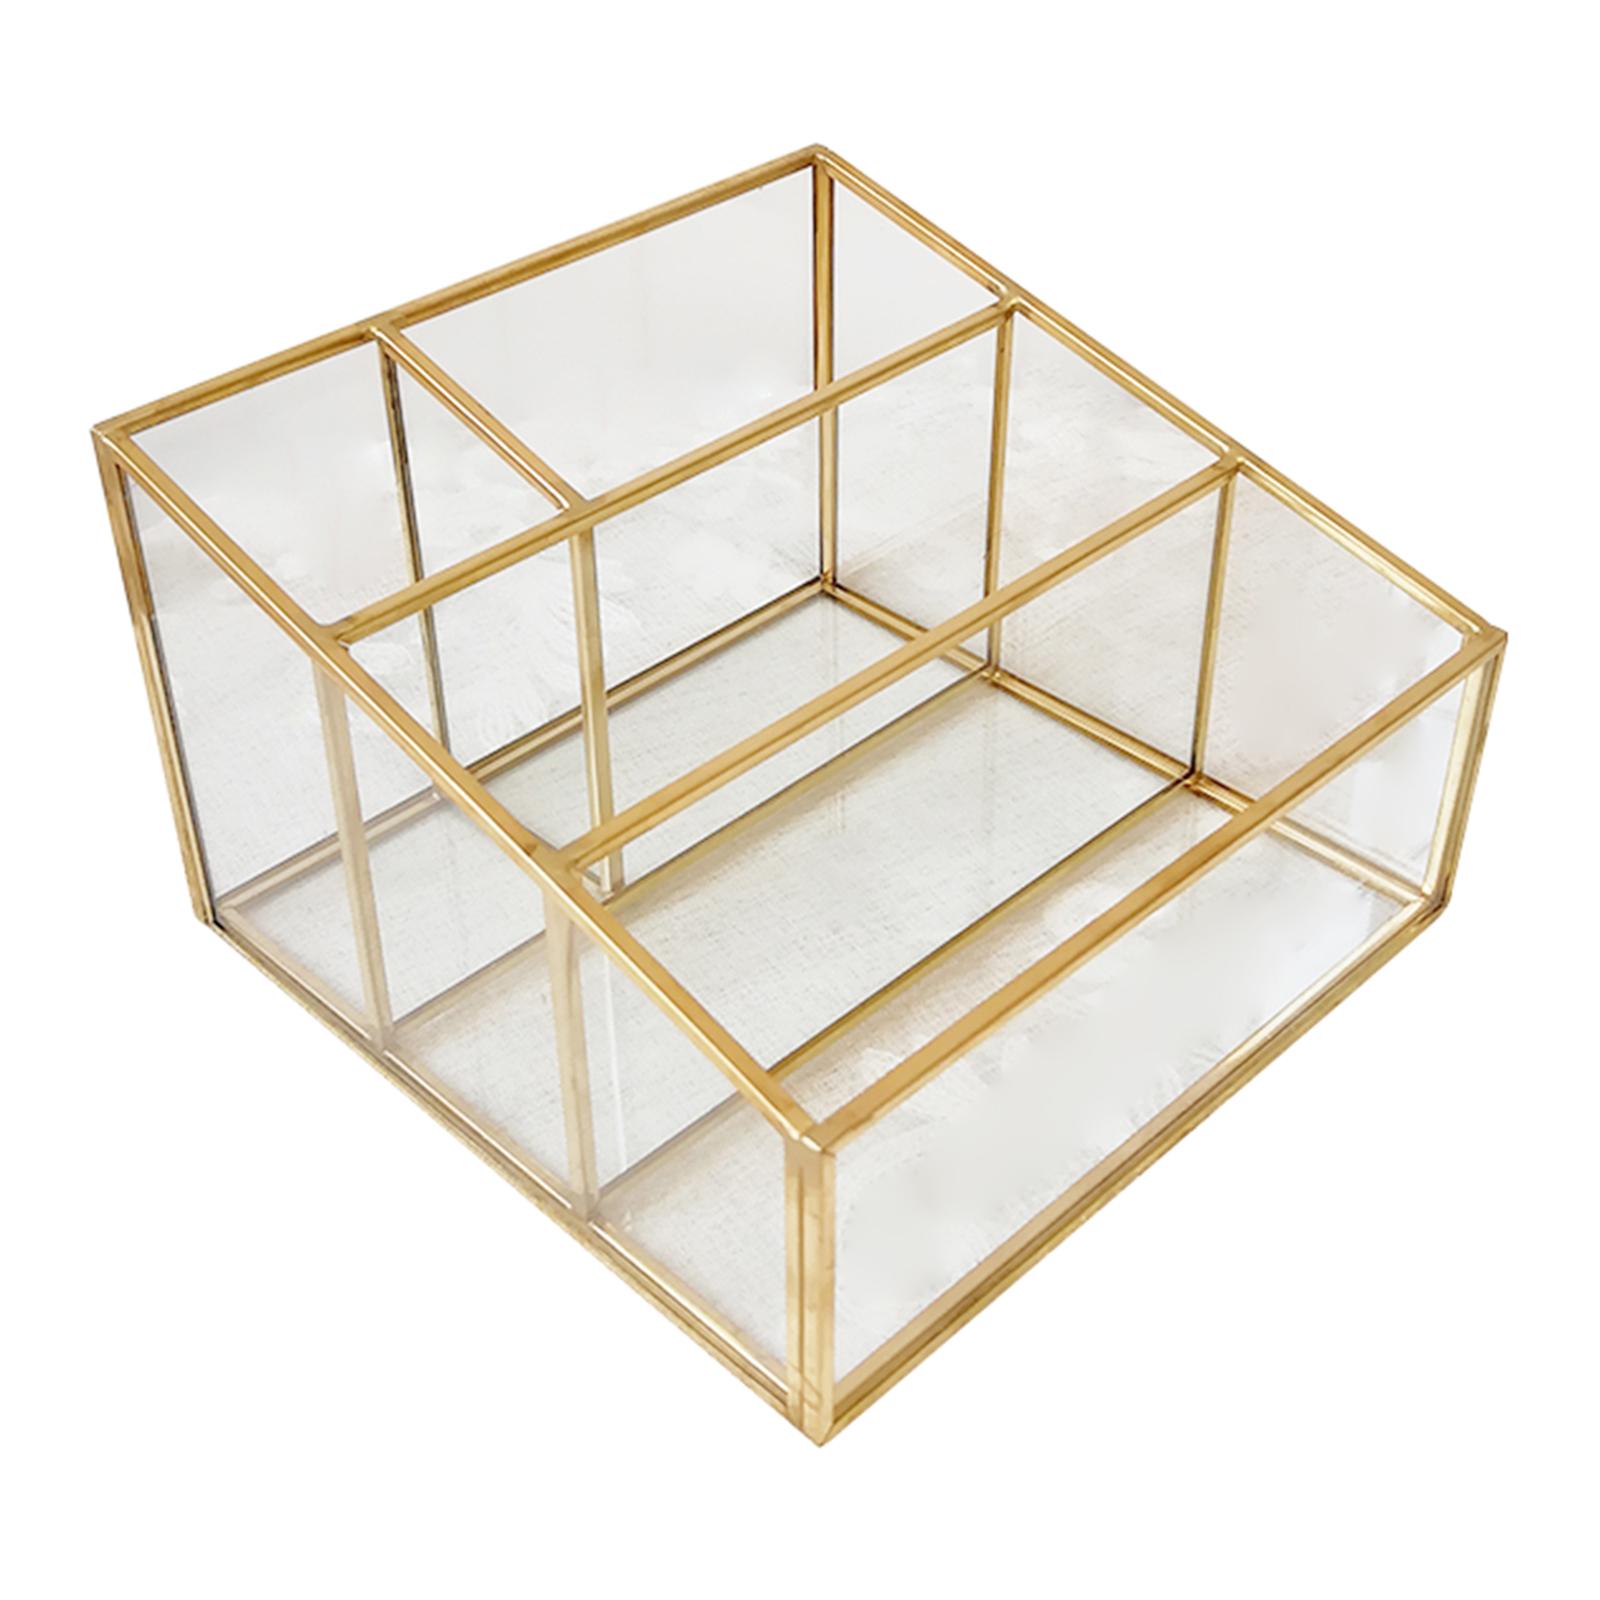 Makeup Organizer, Clear Cosmetic Storage Display Case with 4 Compartments, for Jewelry, Makeup Brushes, Lipsticks